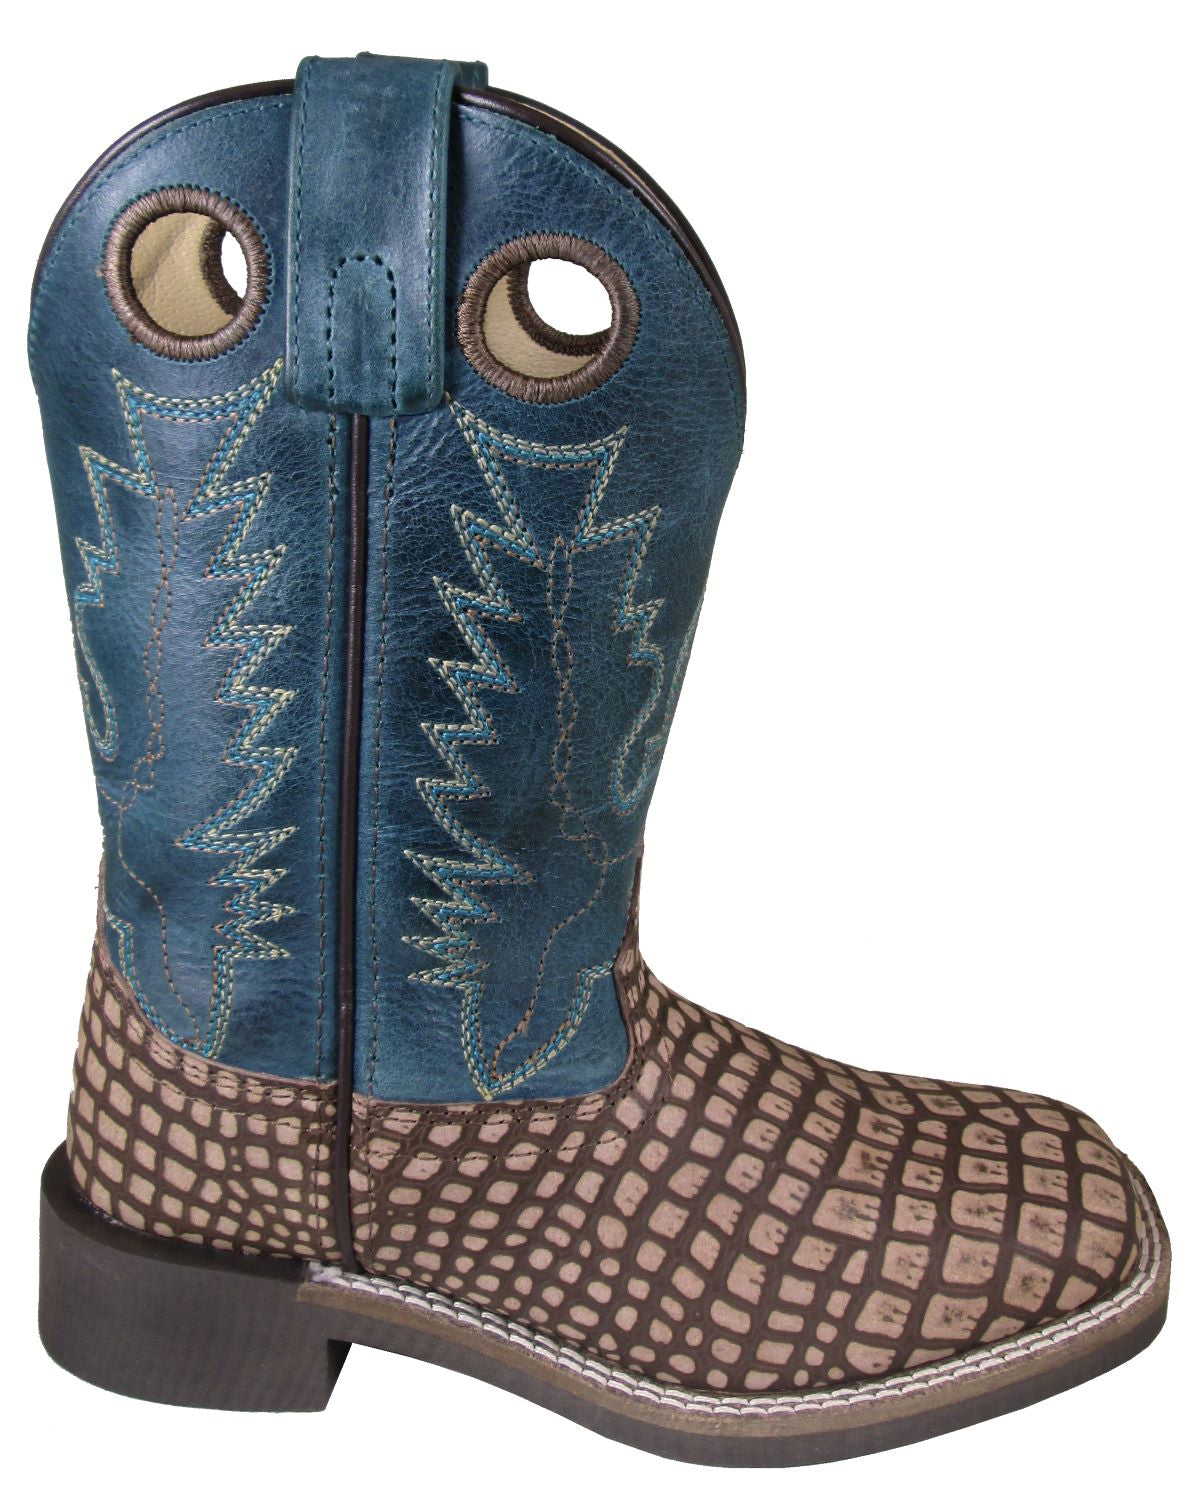 'Smoky Mountain' Children's Reptile Western Square Toe - Vintage Brown / Dark Turquoise